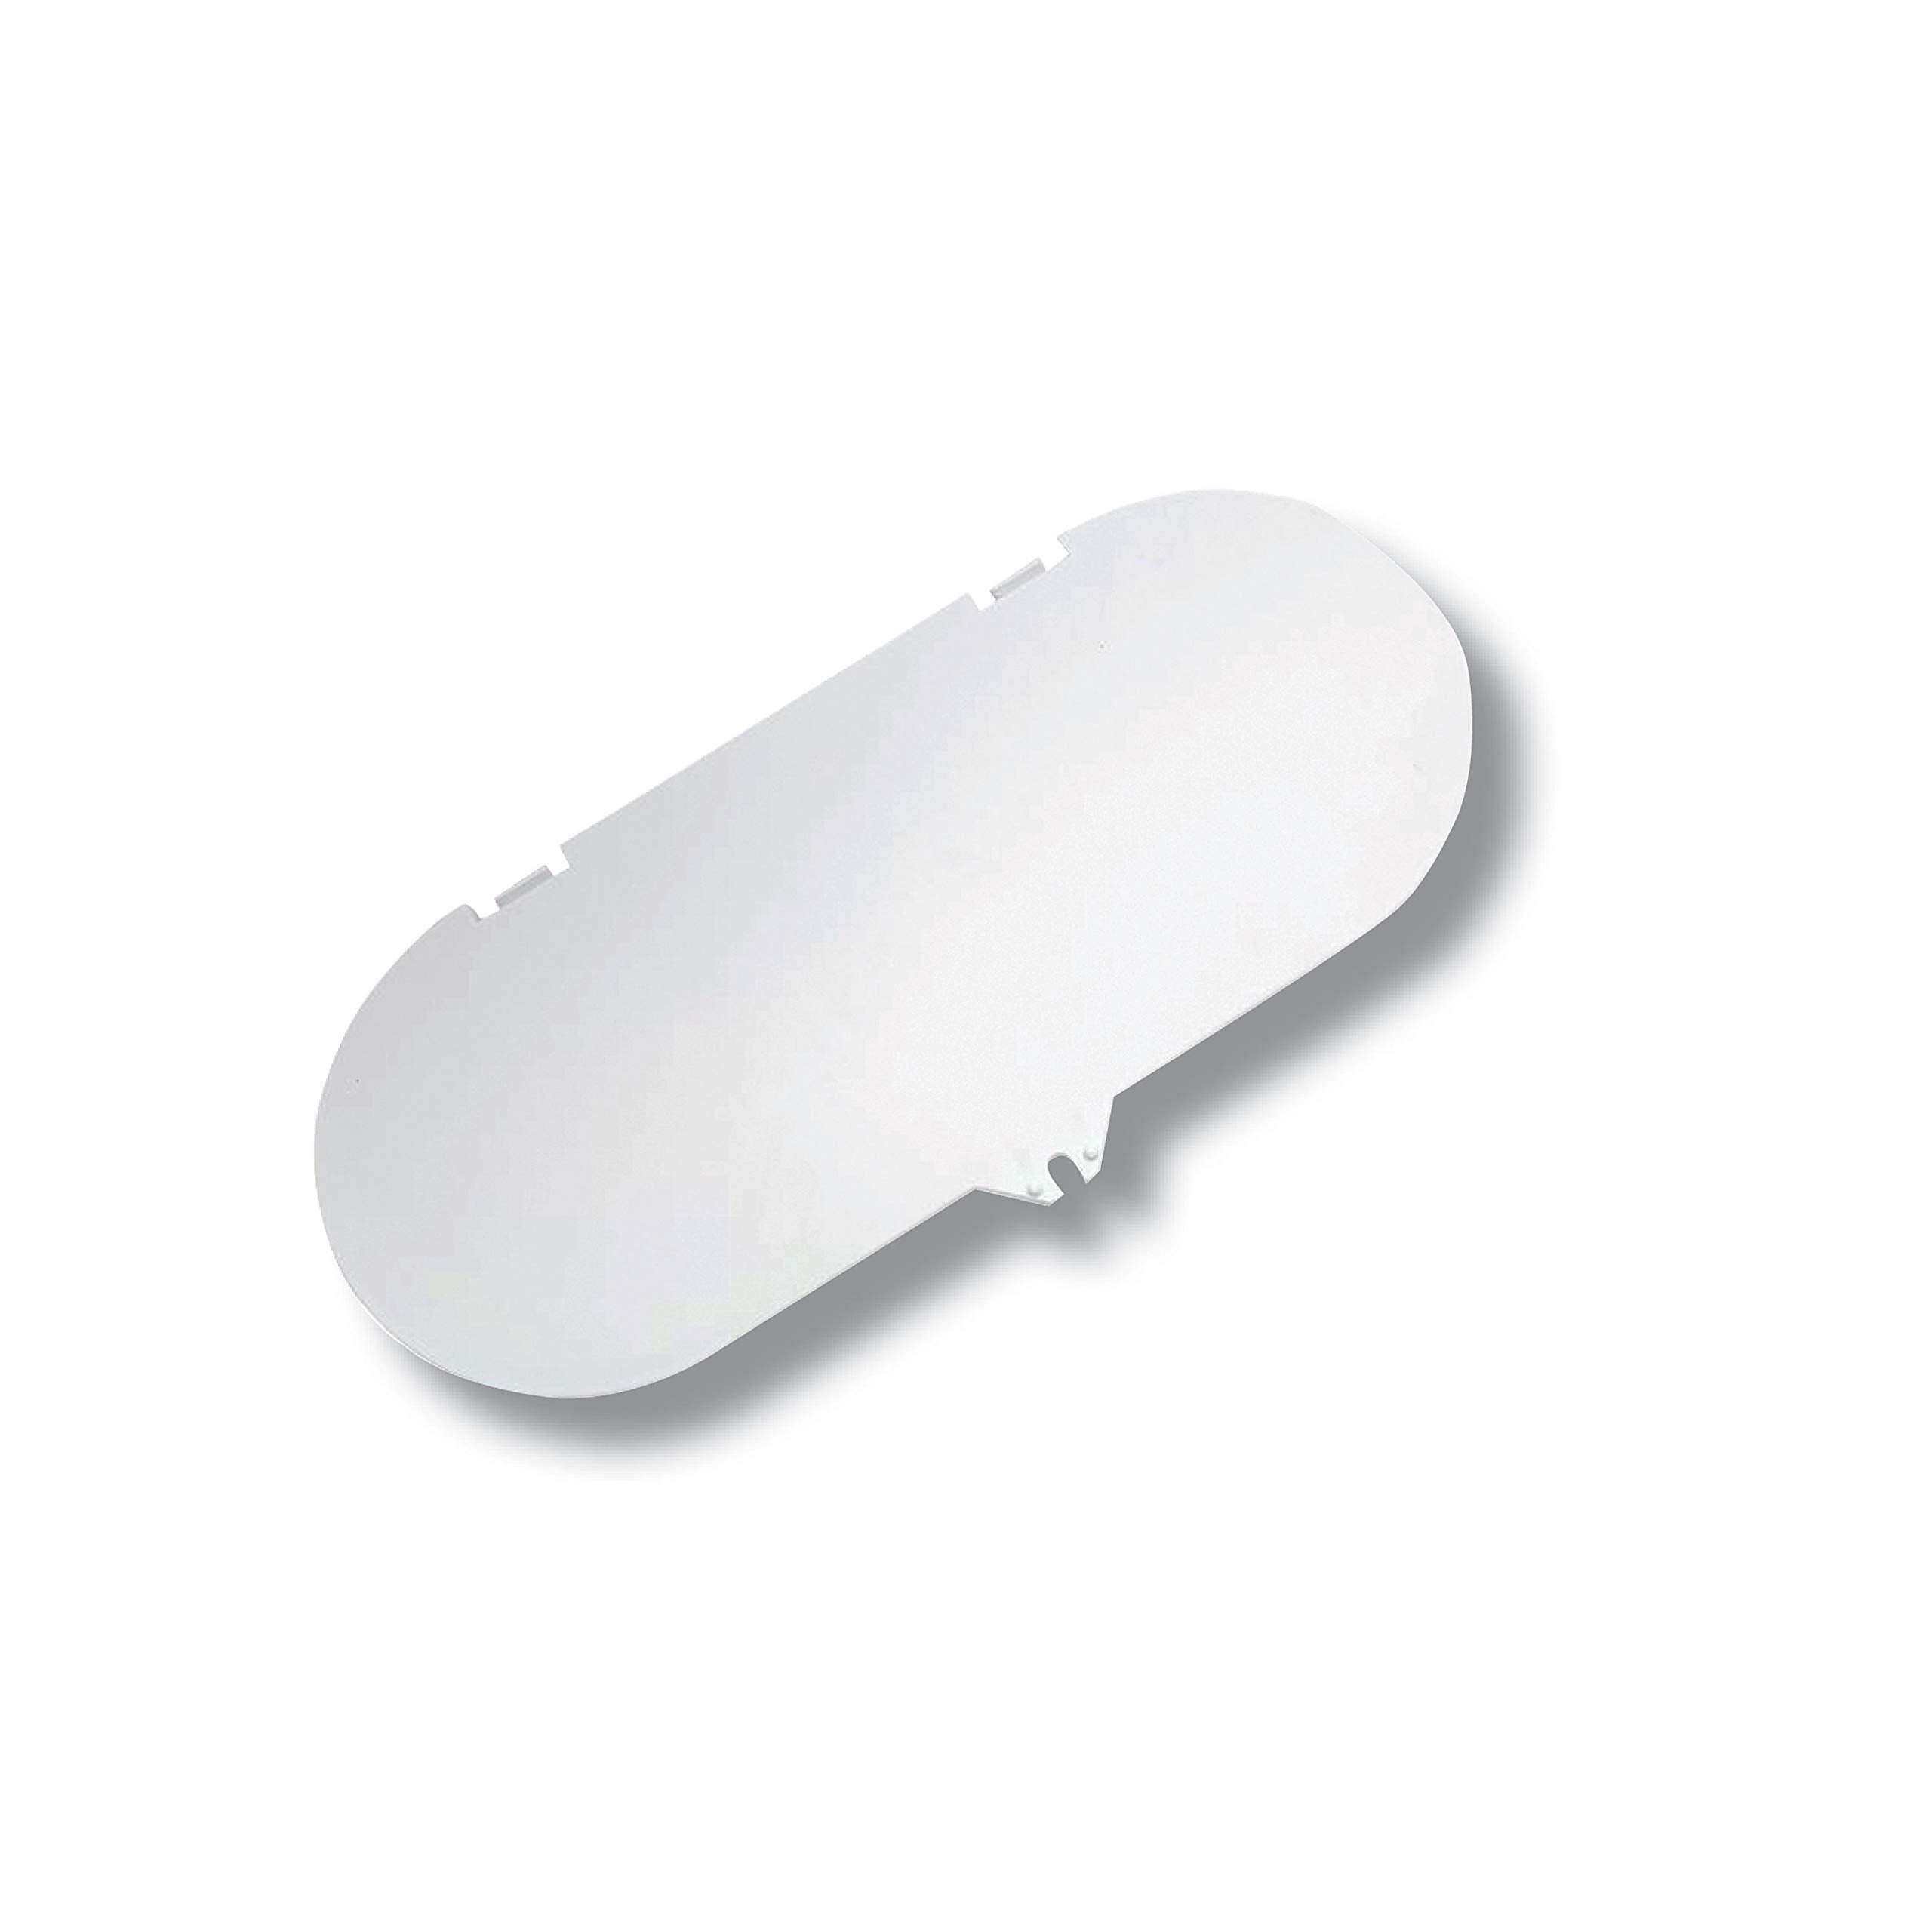 Camco 40566 Lid Replacement for 20 Lb Single Propane Tank Cover, Polar White